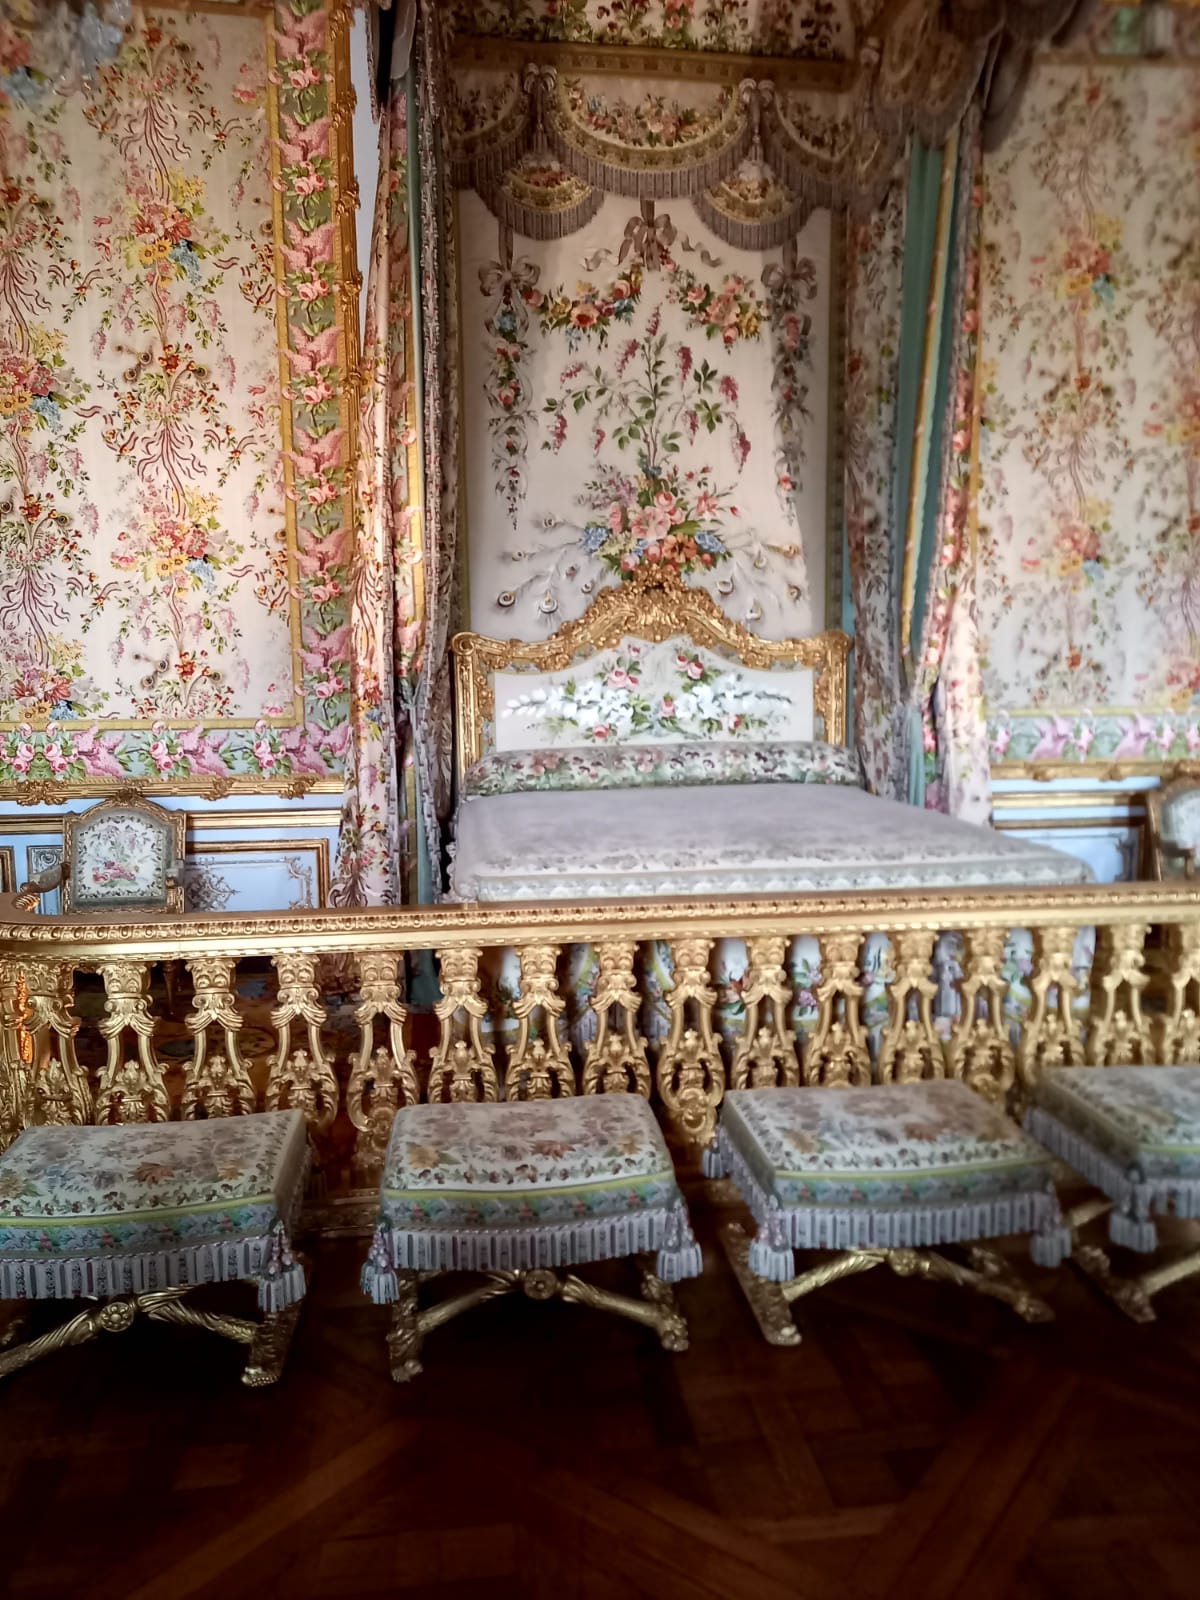 The King's bedroom at Versailles with FleaMarket